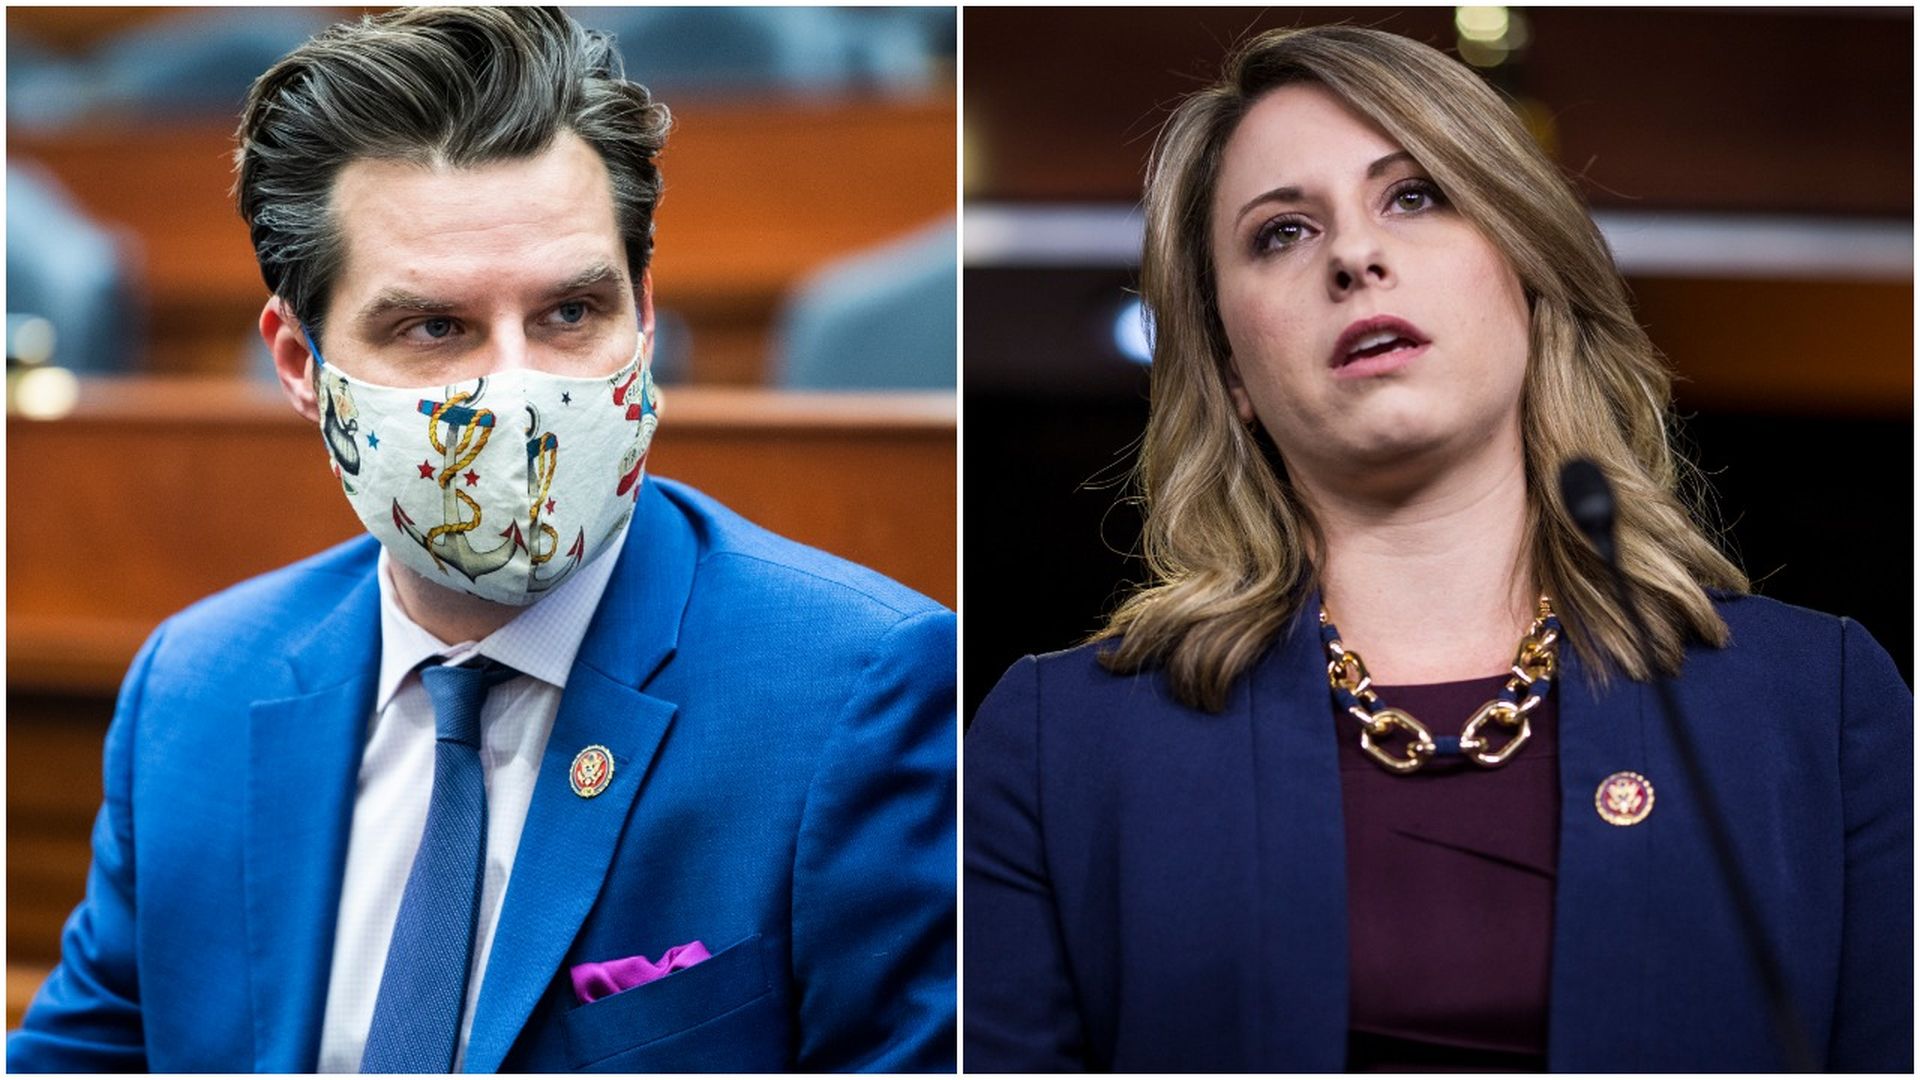 Combination images of Rep. Matt Gaetz and former Rep. Katie Hill.